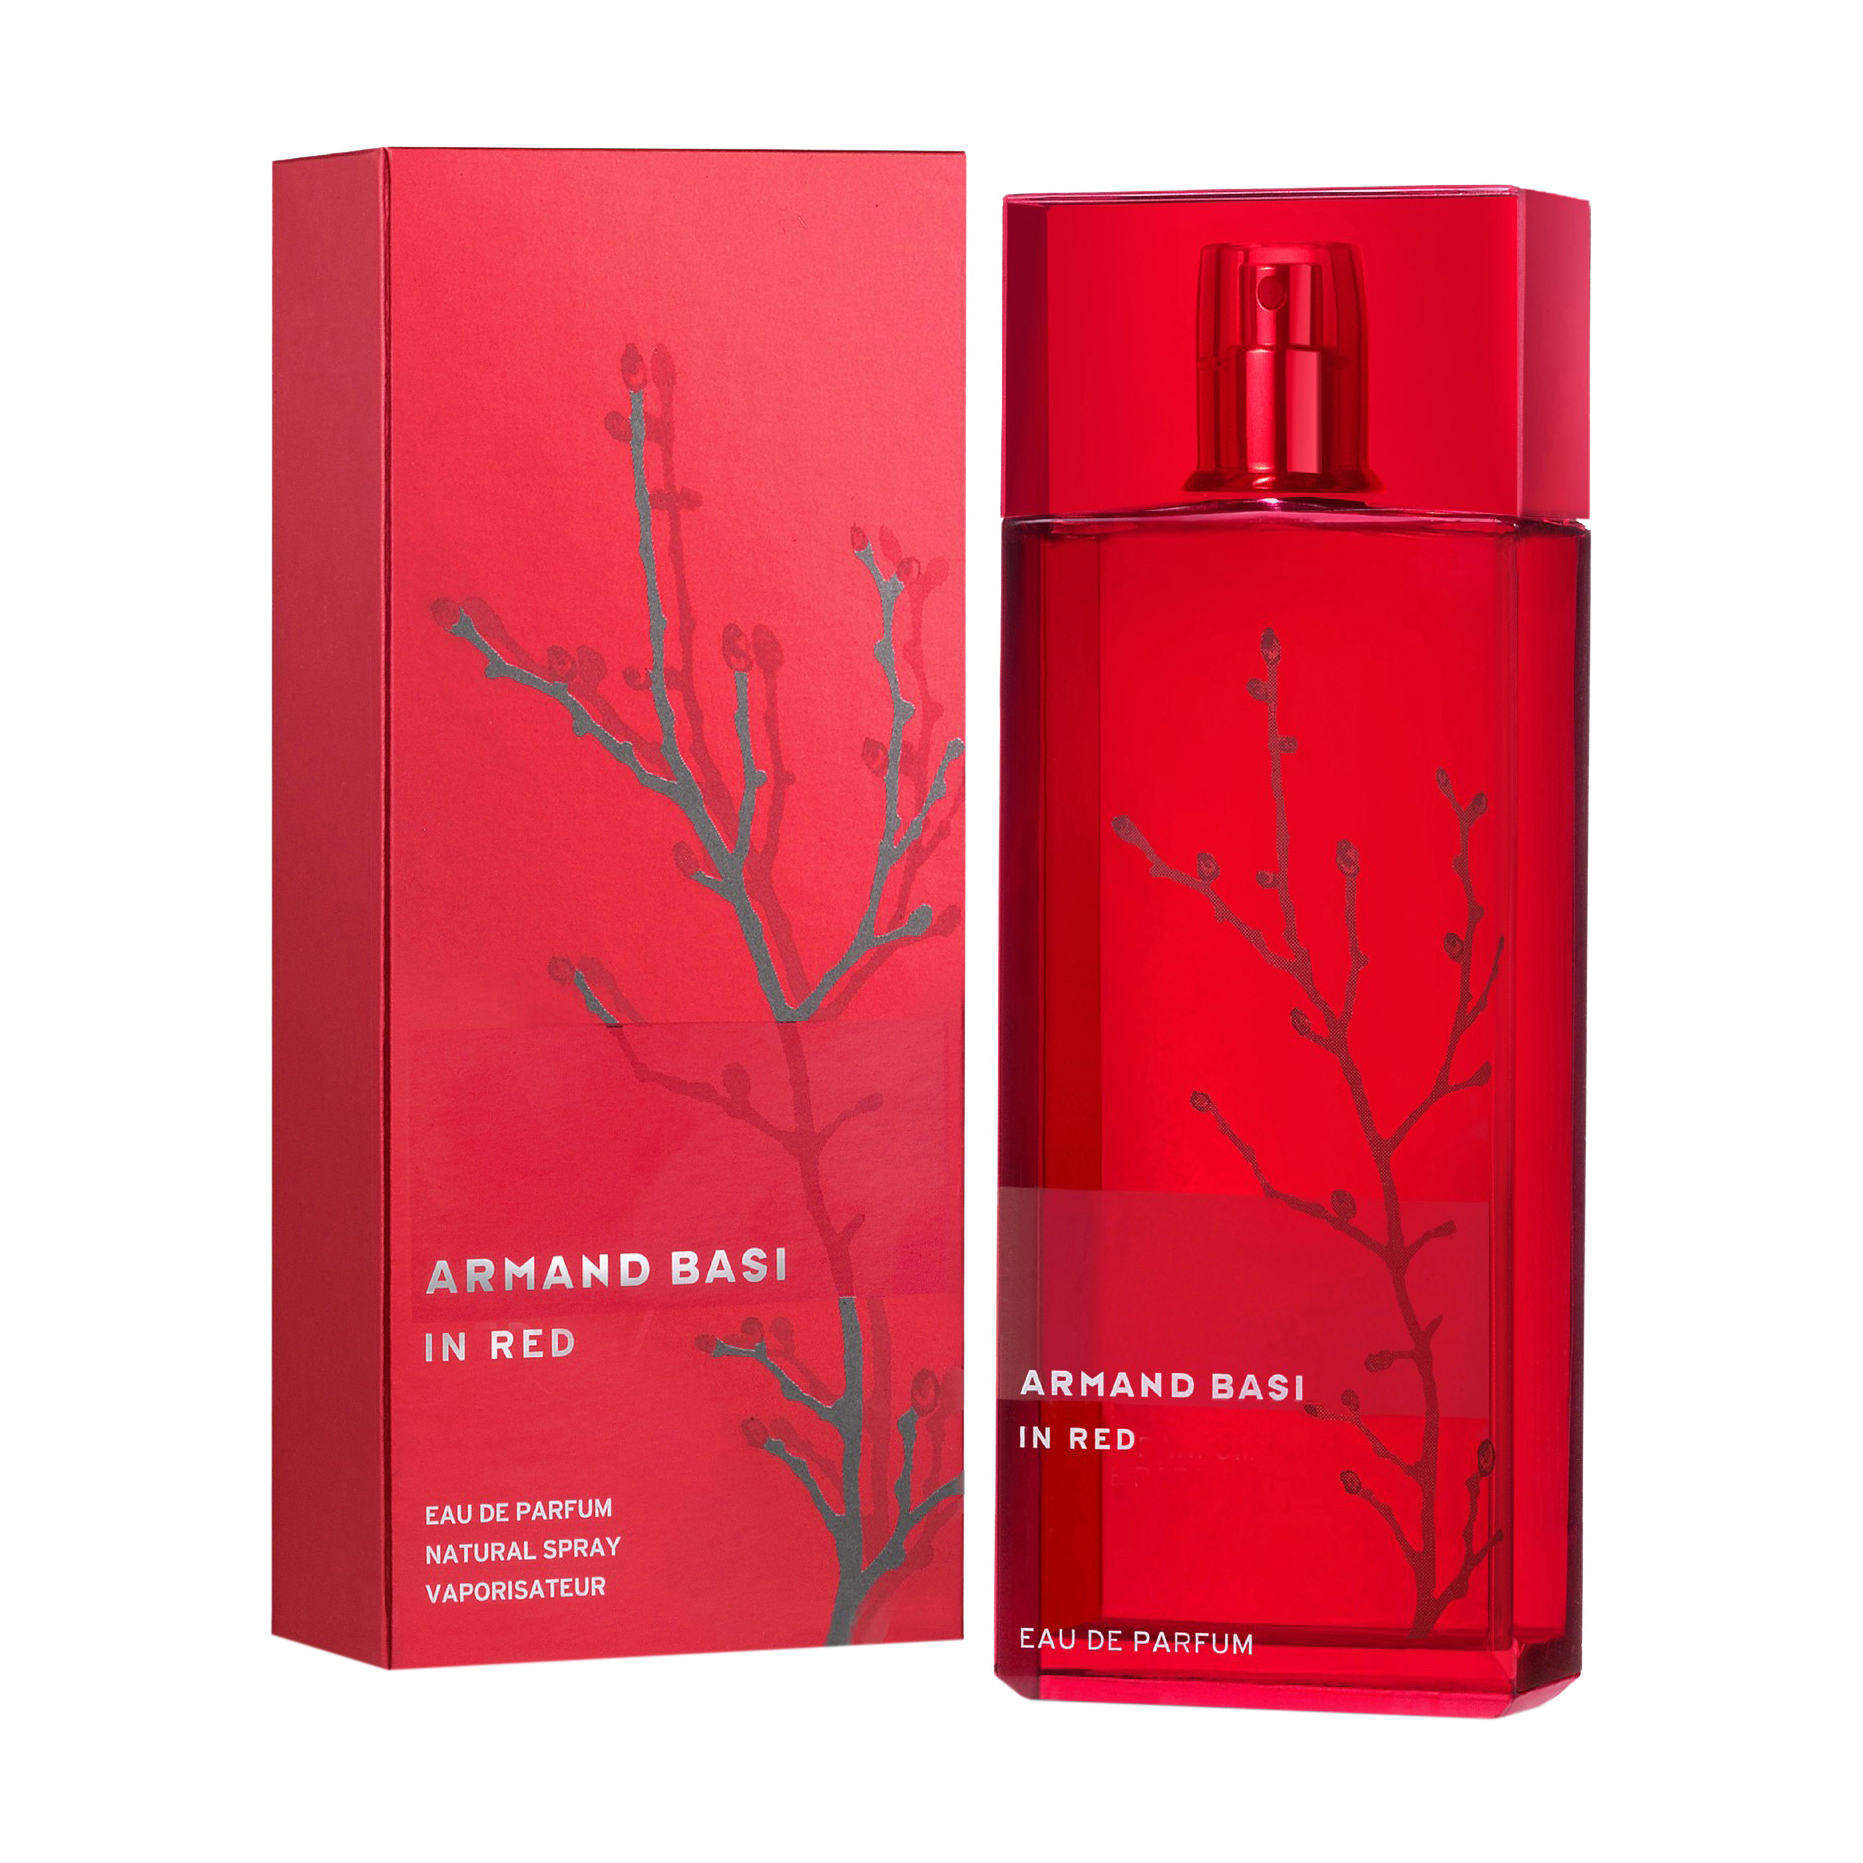 Туалетная вода basi in red. Armand basi in Red 100ml. Armand basi in Red 100мл. Armand basi in Red EDP 100 мл. Парфюм Armand basi in Red.